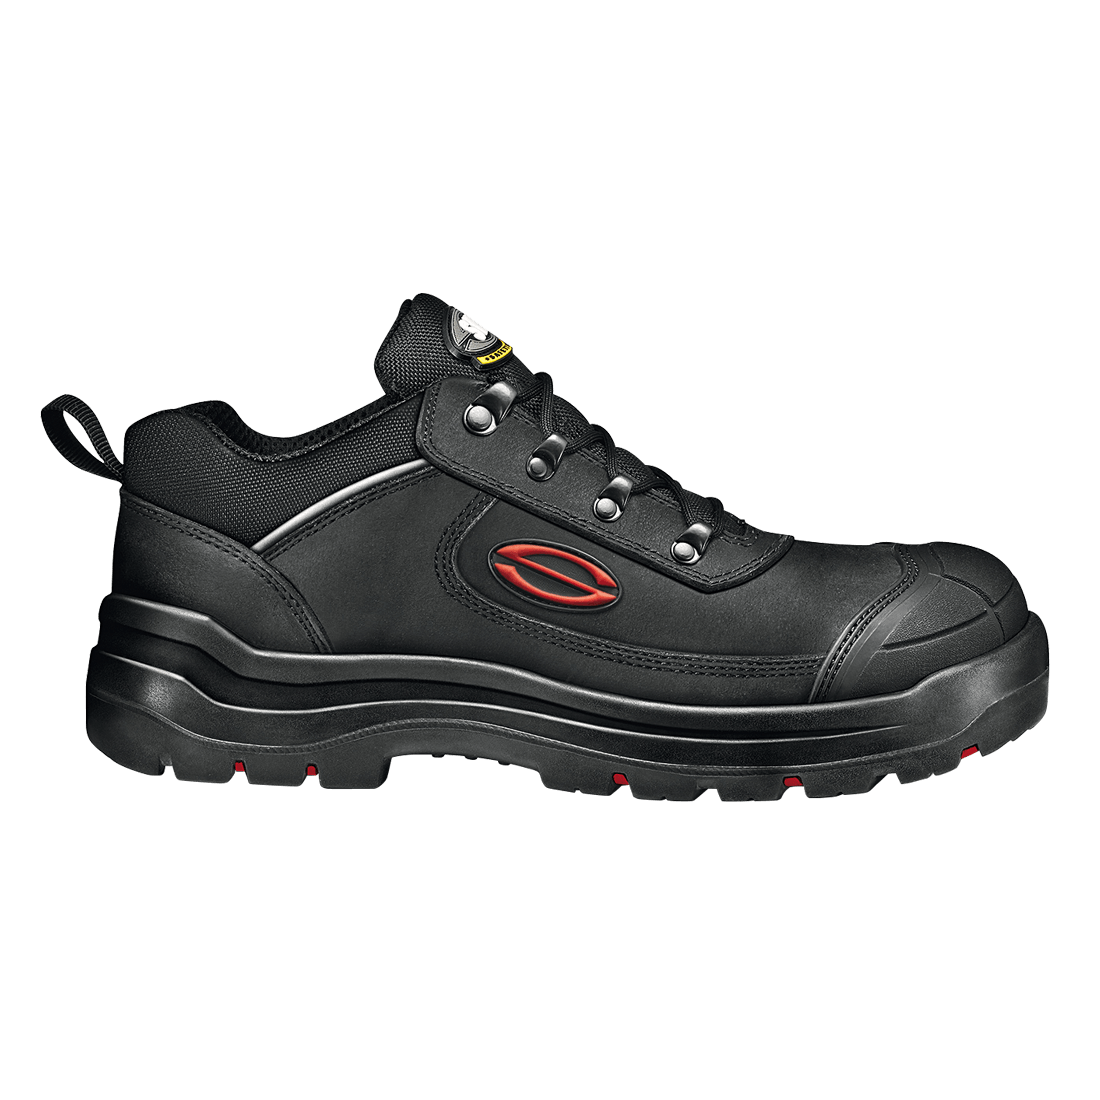 LOW BLACK FOBIA SHOE | Sir Safety System